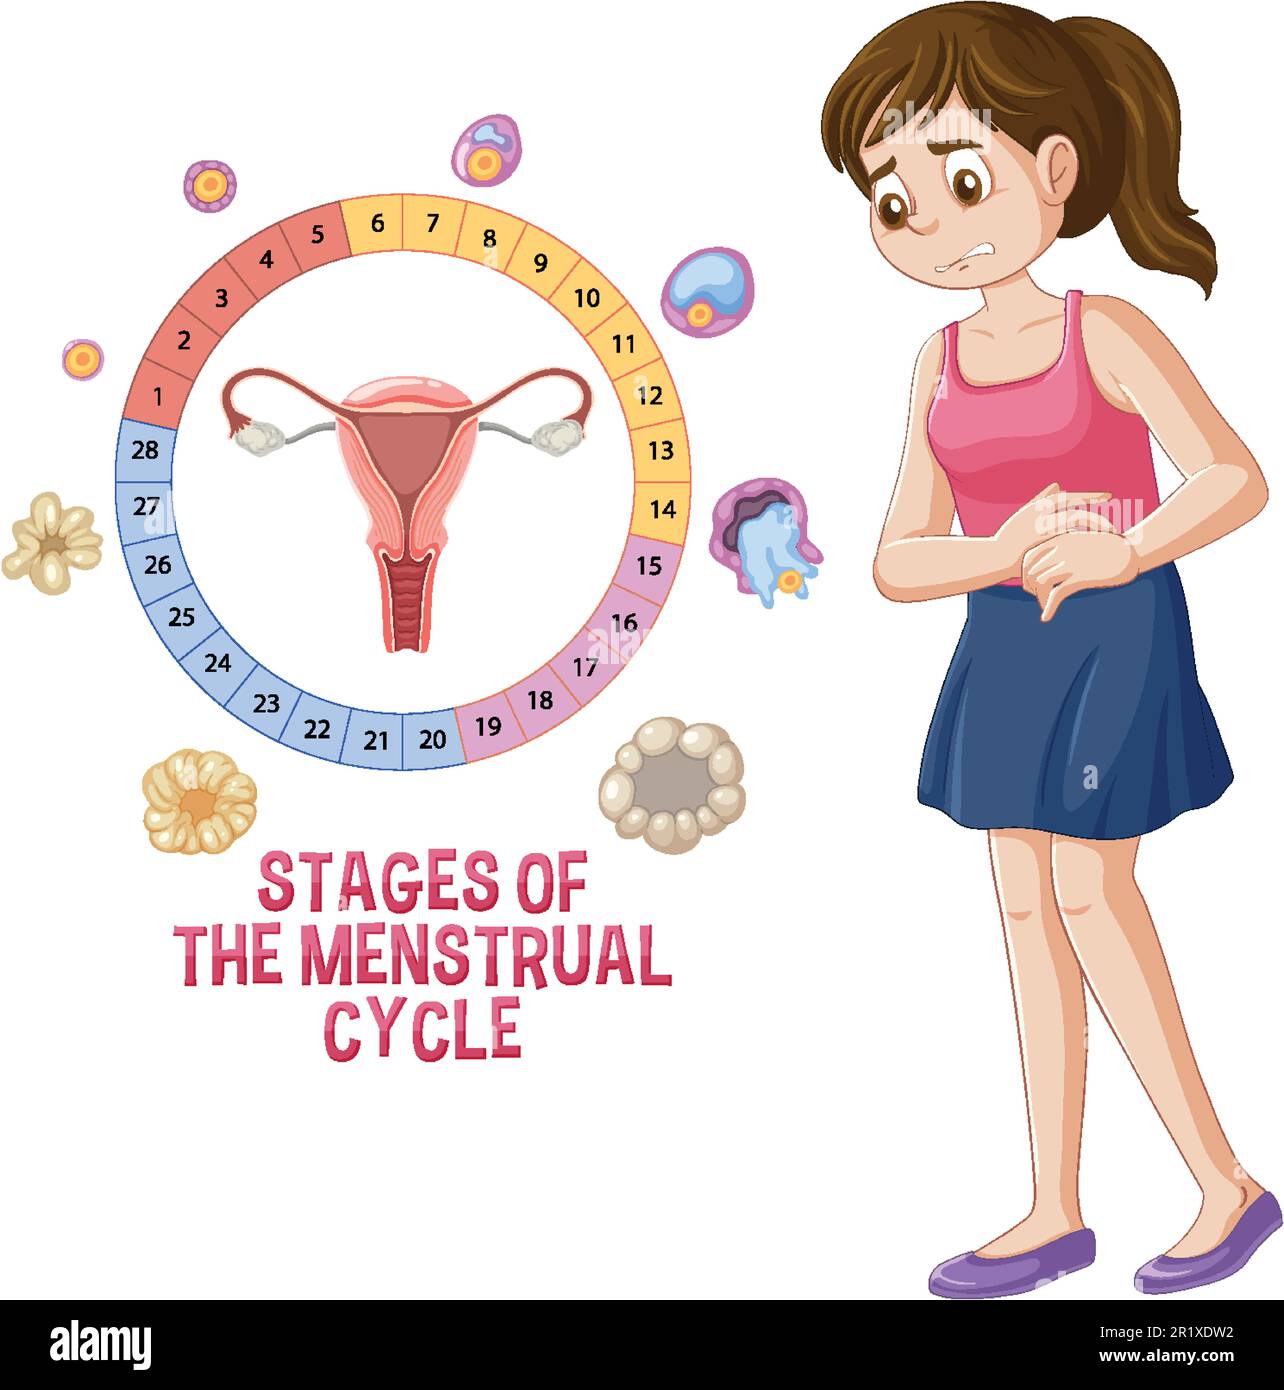 Female Menstrual Cycle Graphic Stock Vector - Illustration of